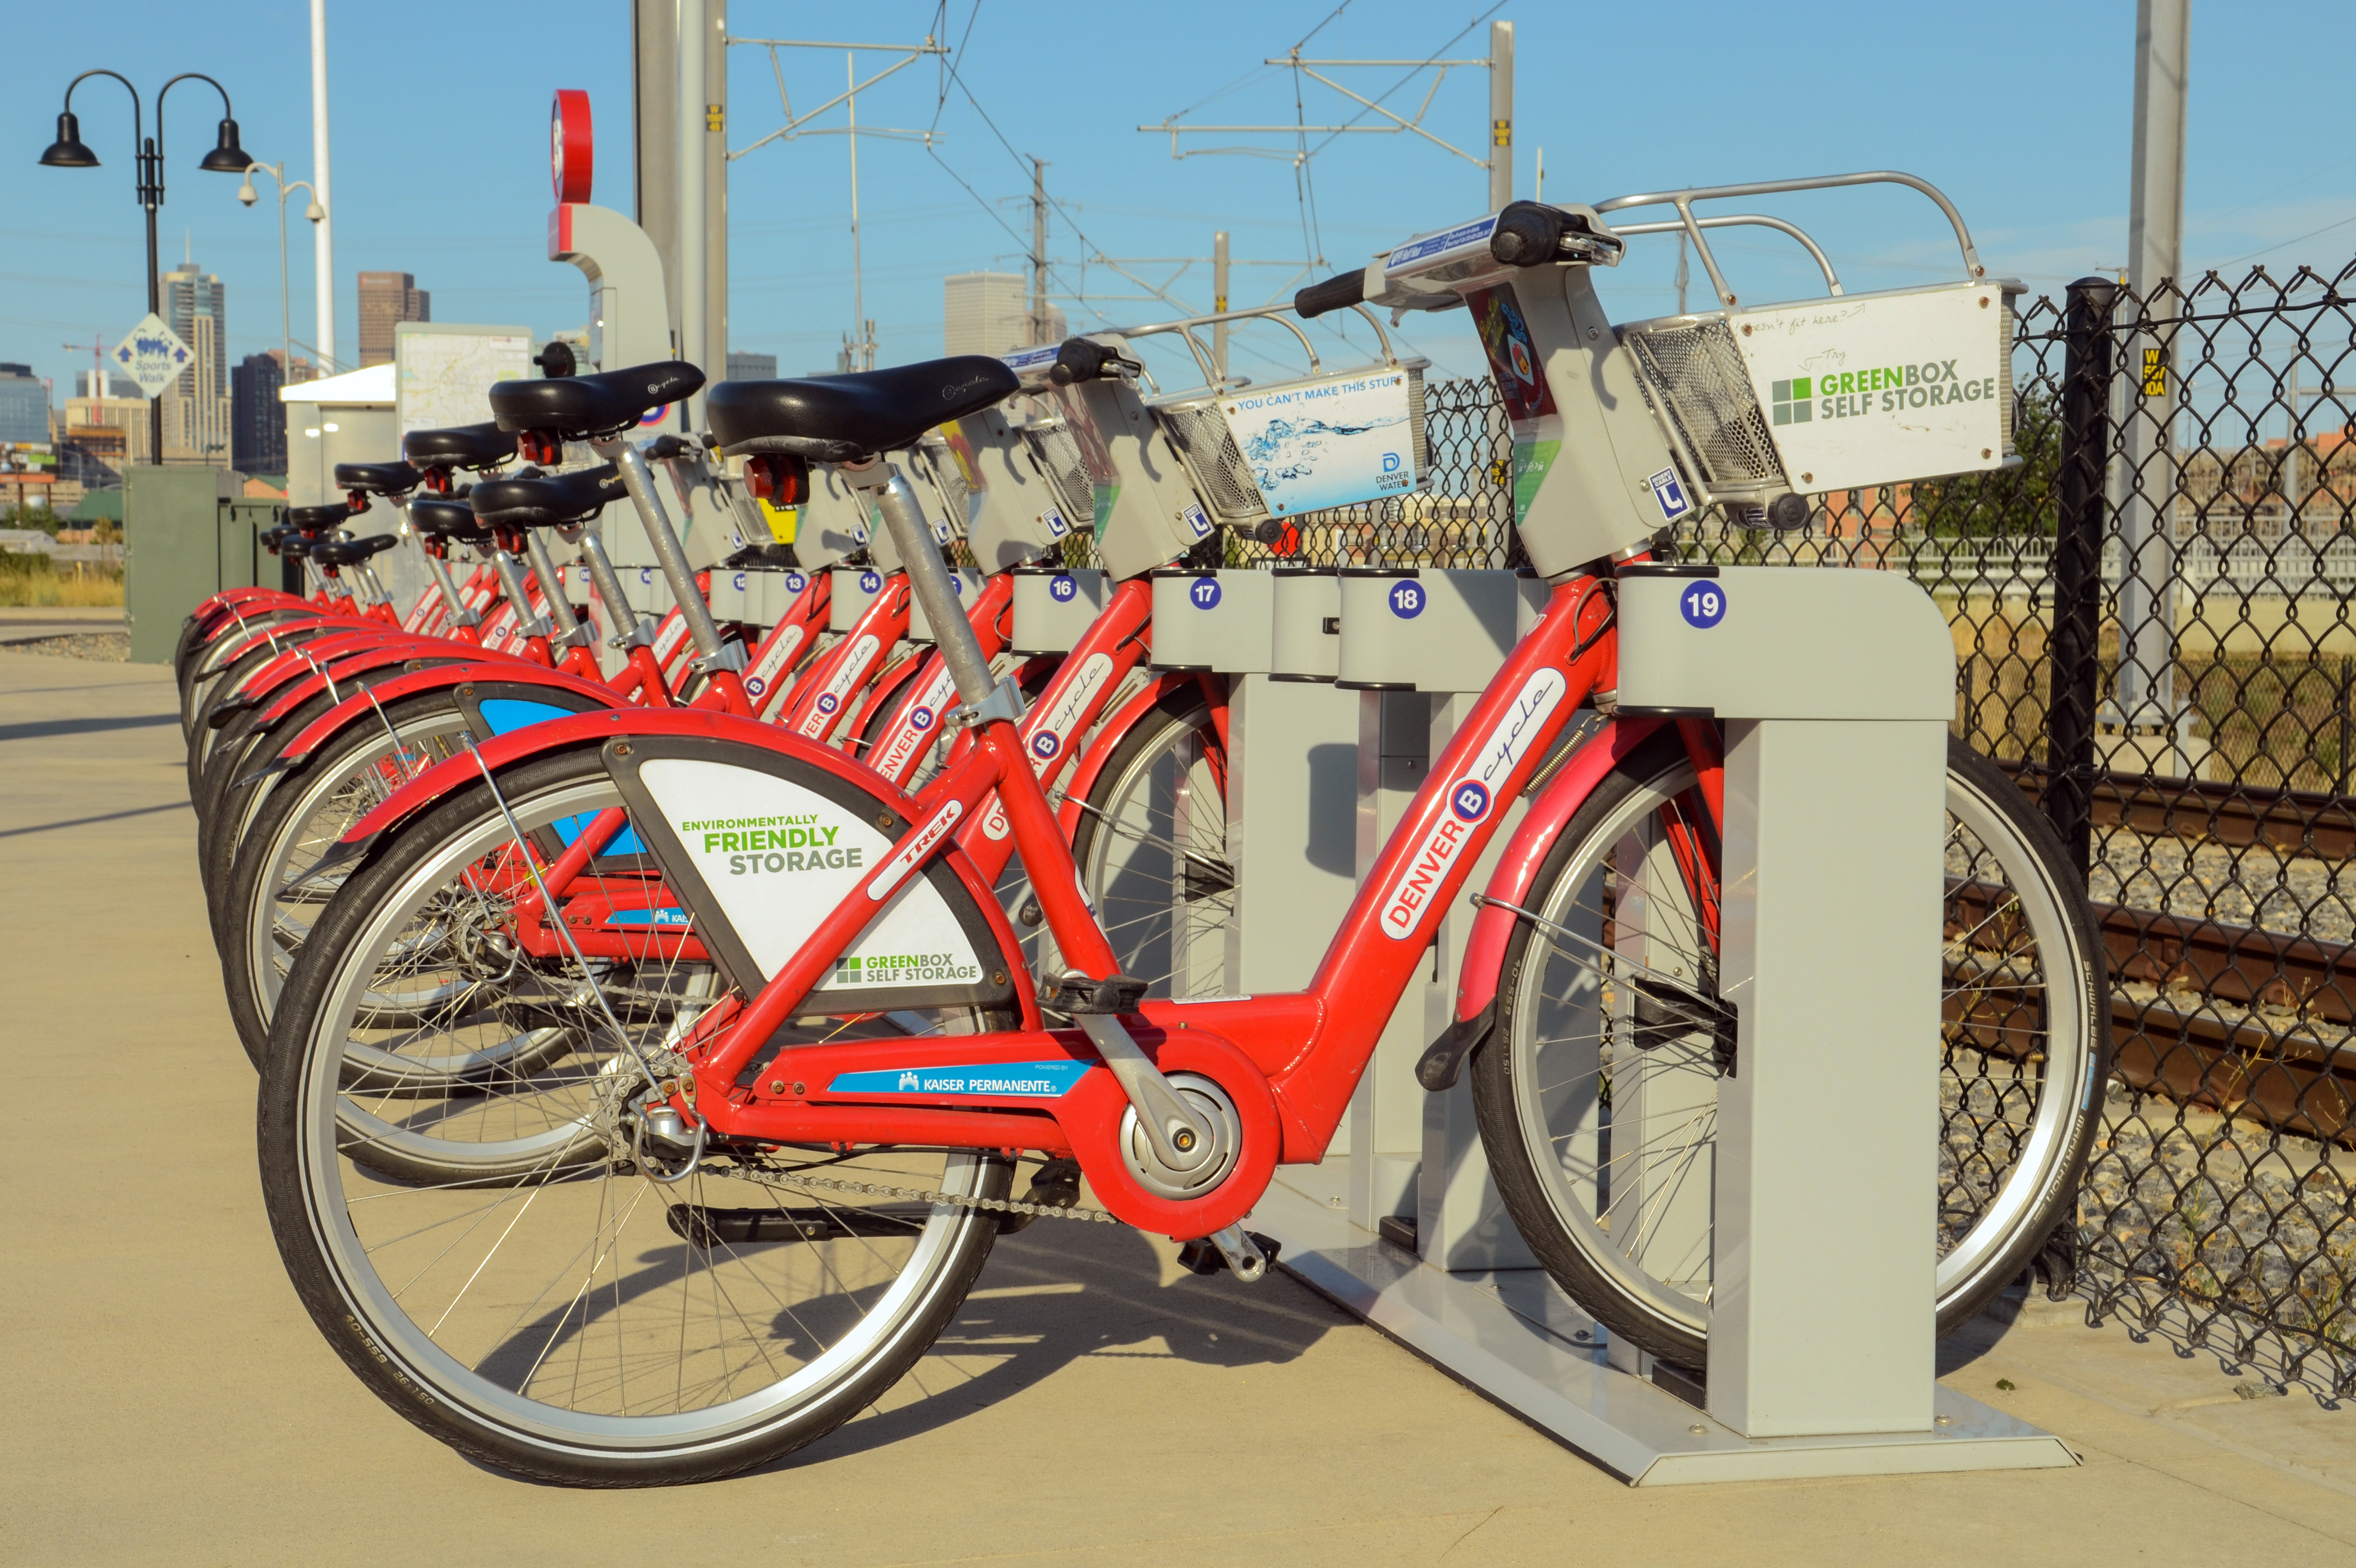 A row of bright red B-Cycle bikes parked at a bike-share station next to train tracks with a city skyline in the distance.